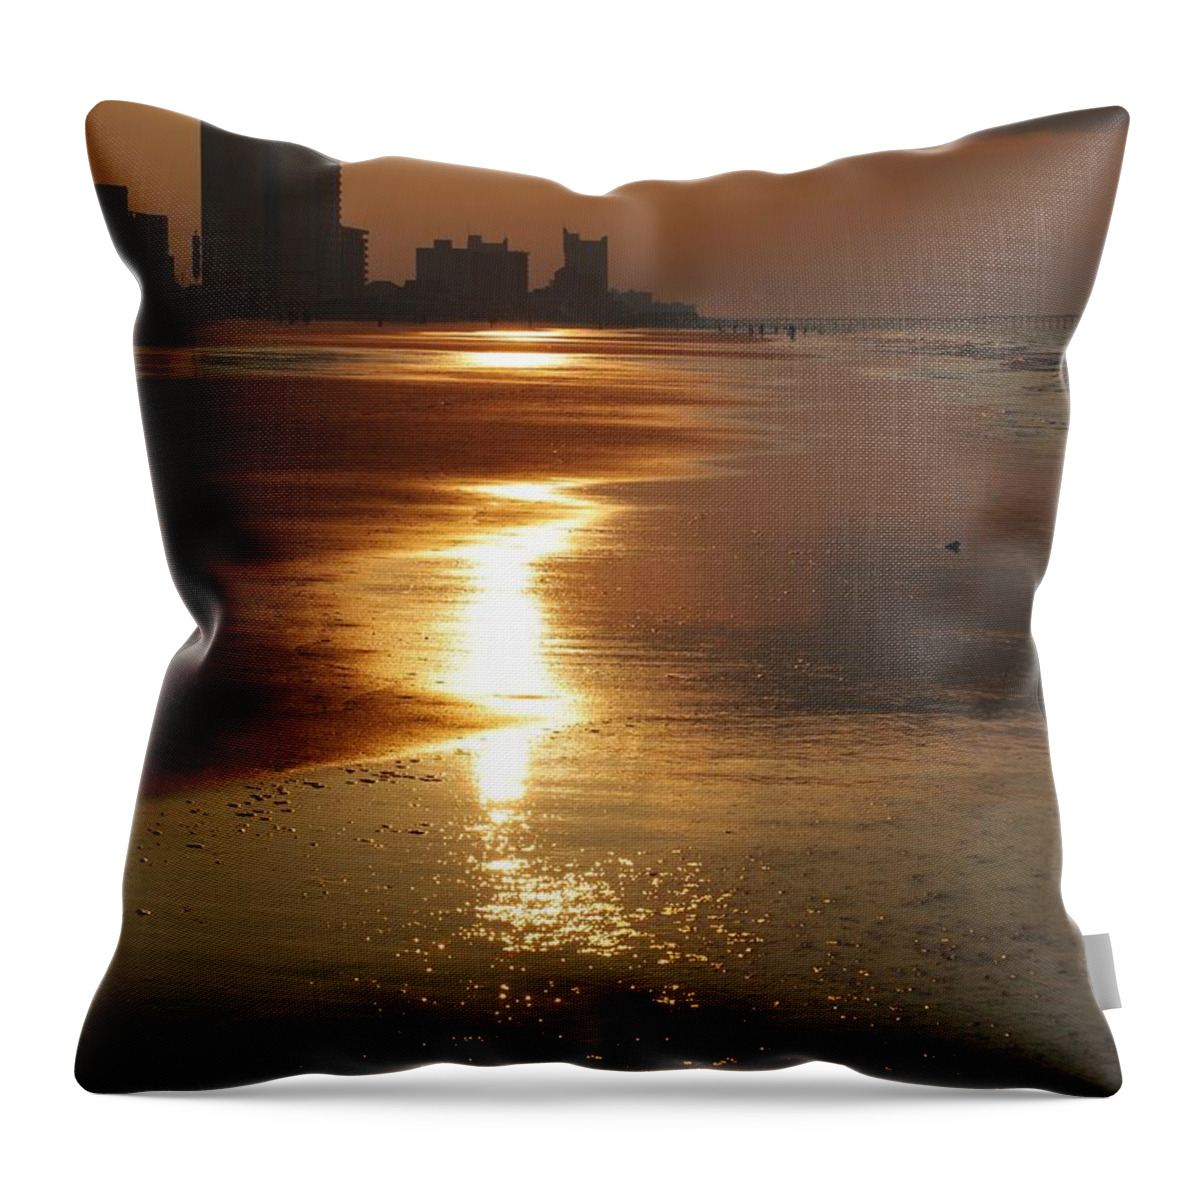 Beach Throw Pillow featuring the photograph Sunrise At The Beach by Eric Liller